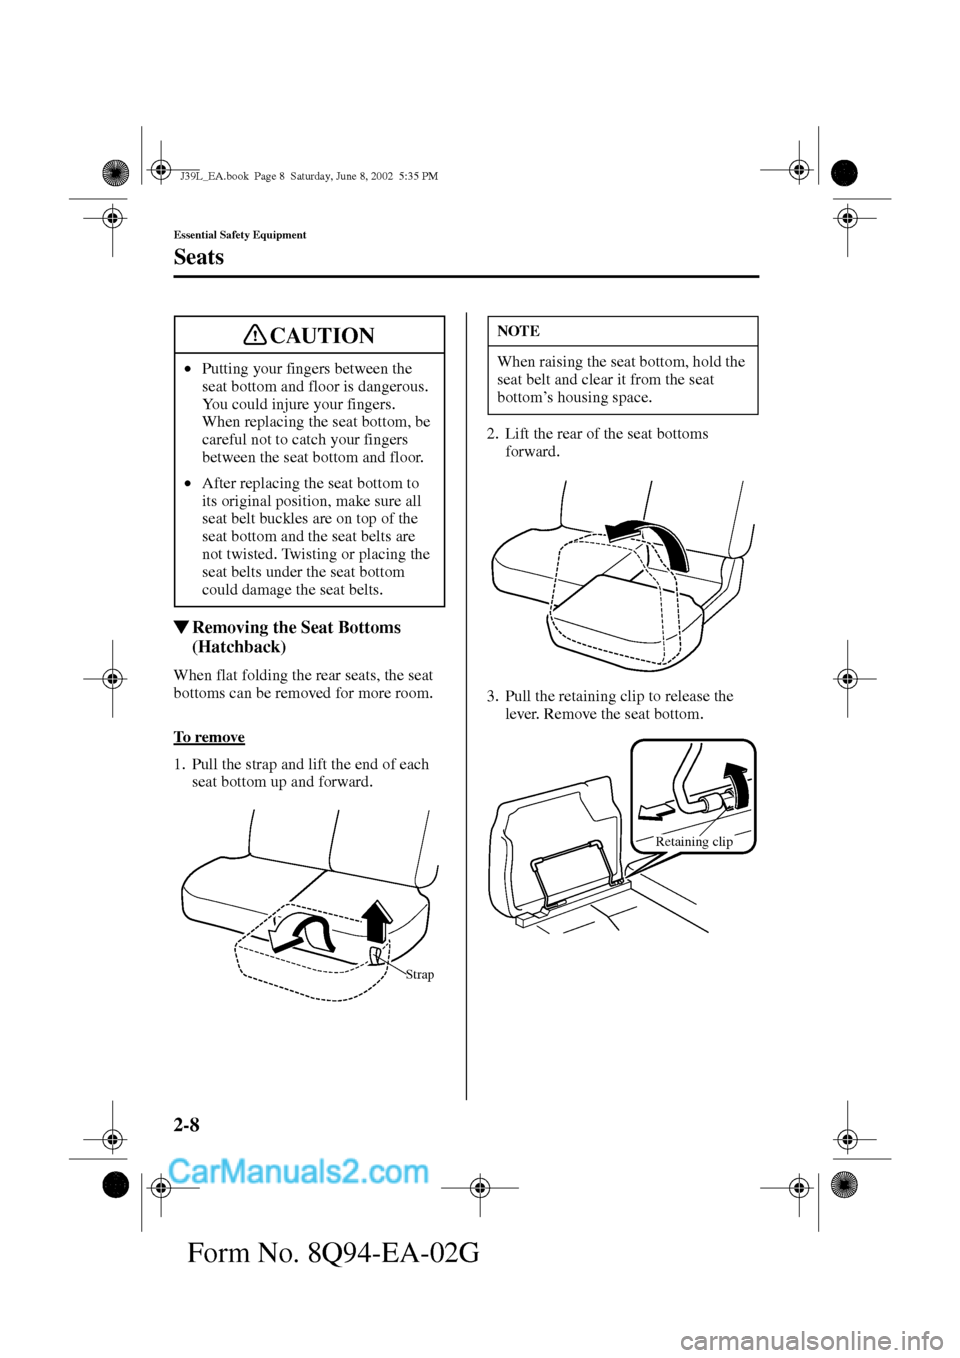 MAZDA MODEL PROTÉGÉ 2003  Owners Manual (in English) 2-8
Essential Safety Equipment
Seats
Form No. 8Q94-EA-02G
Removing the Seat Bottoms 
(Hatchback)
When flat folding the rear seats, the seat 
bottoms can be removed for more room.
To  r e m o v e
1. P